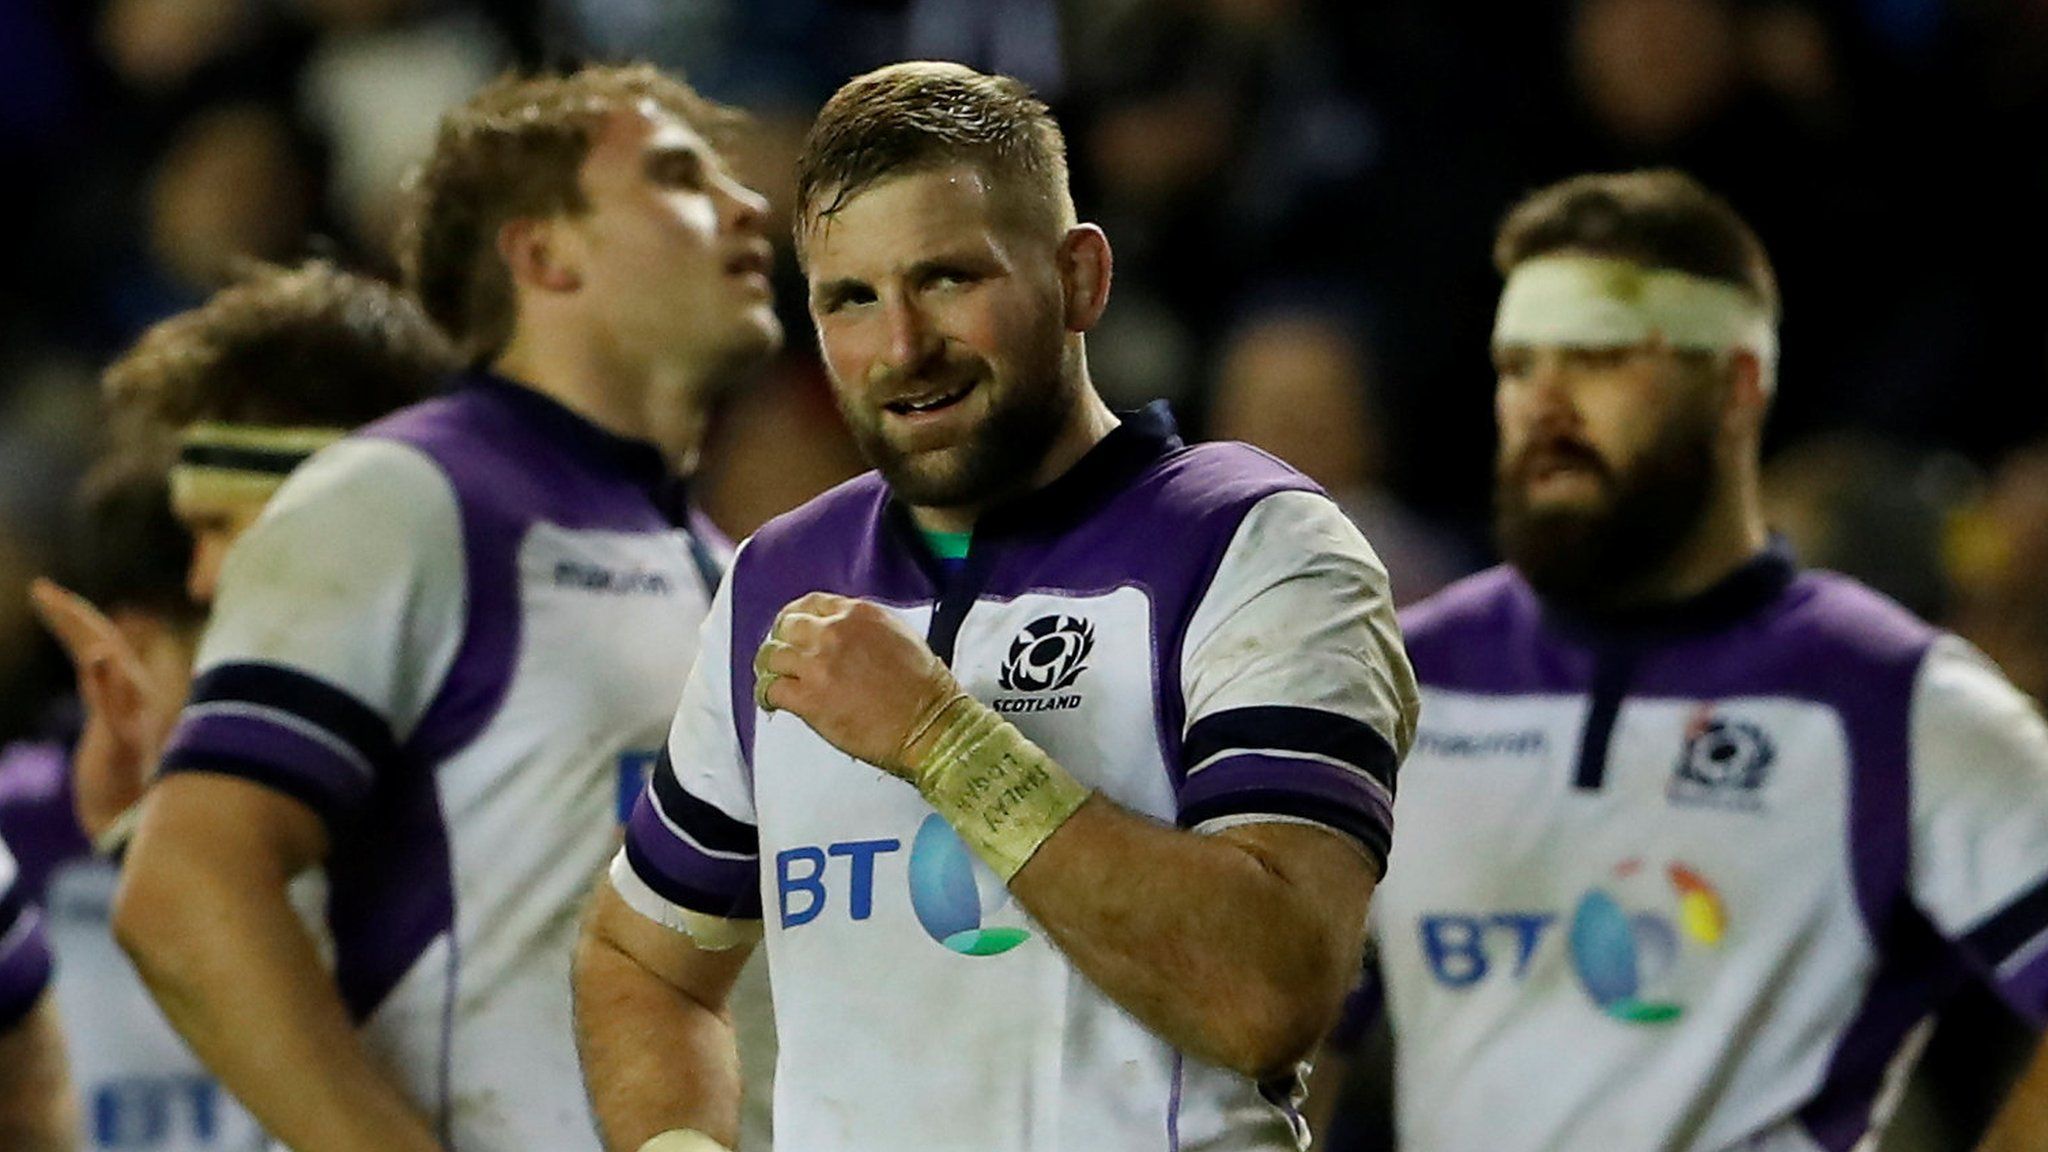 John Barclay has a wry smile at full-time